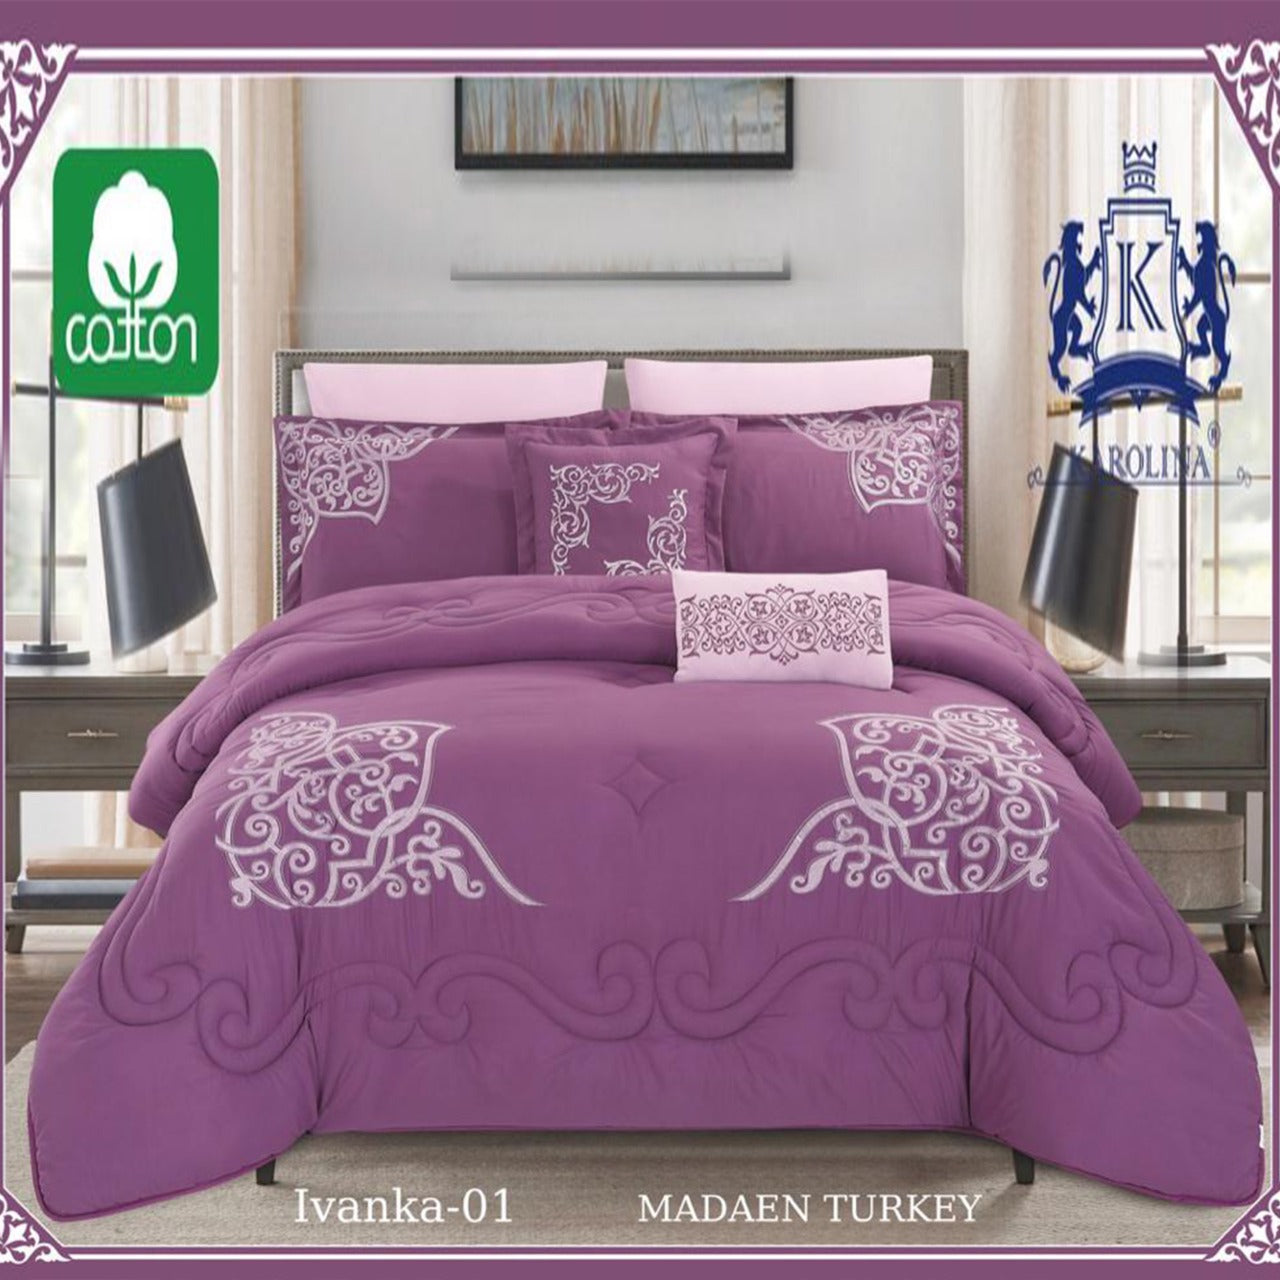 10 Piece Comforter Bedding With Sheet and Decorative Pillow Shams | Made in Turkey Ivanka - 01 Zaappy